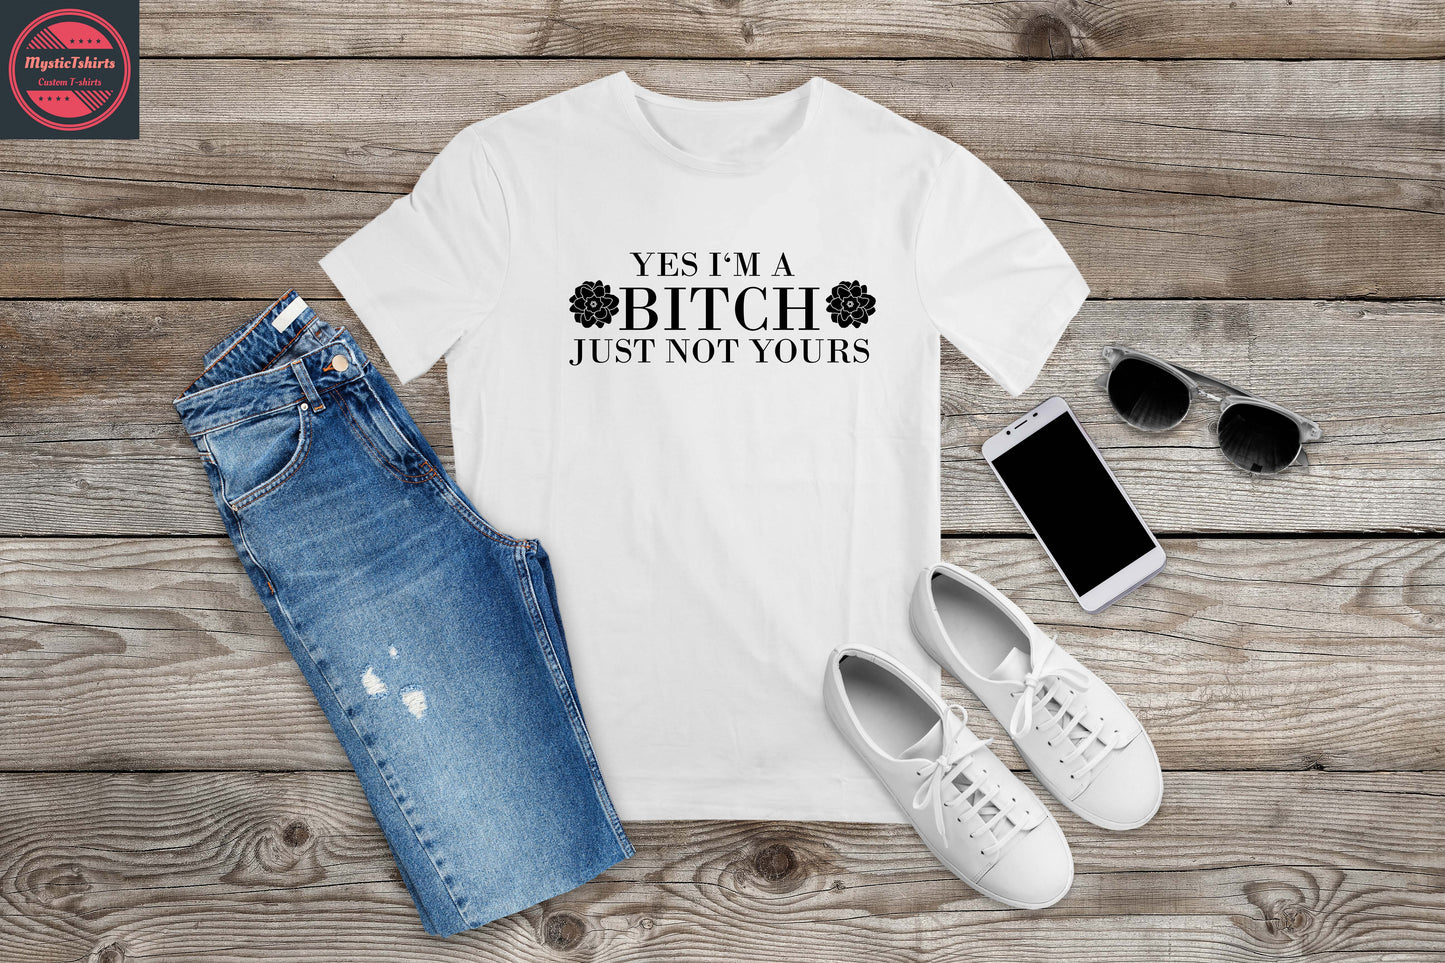 480. YES I'M A BITCH JUST NOT YOURS, Custom Made Shirt, Personalized T-Shirt, Custom Text, Make Your Own Shirt, Custom Tee